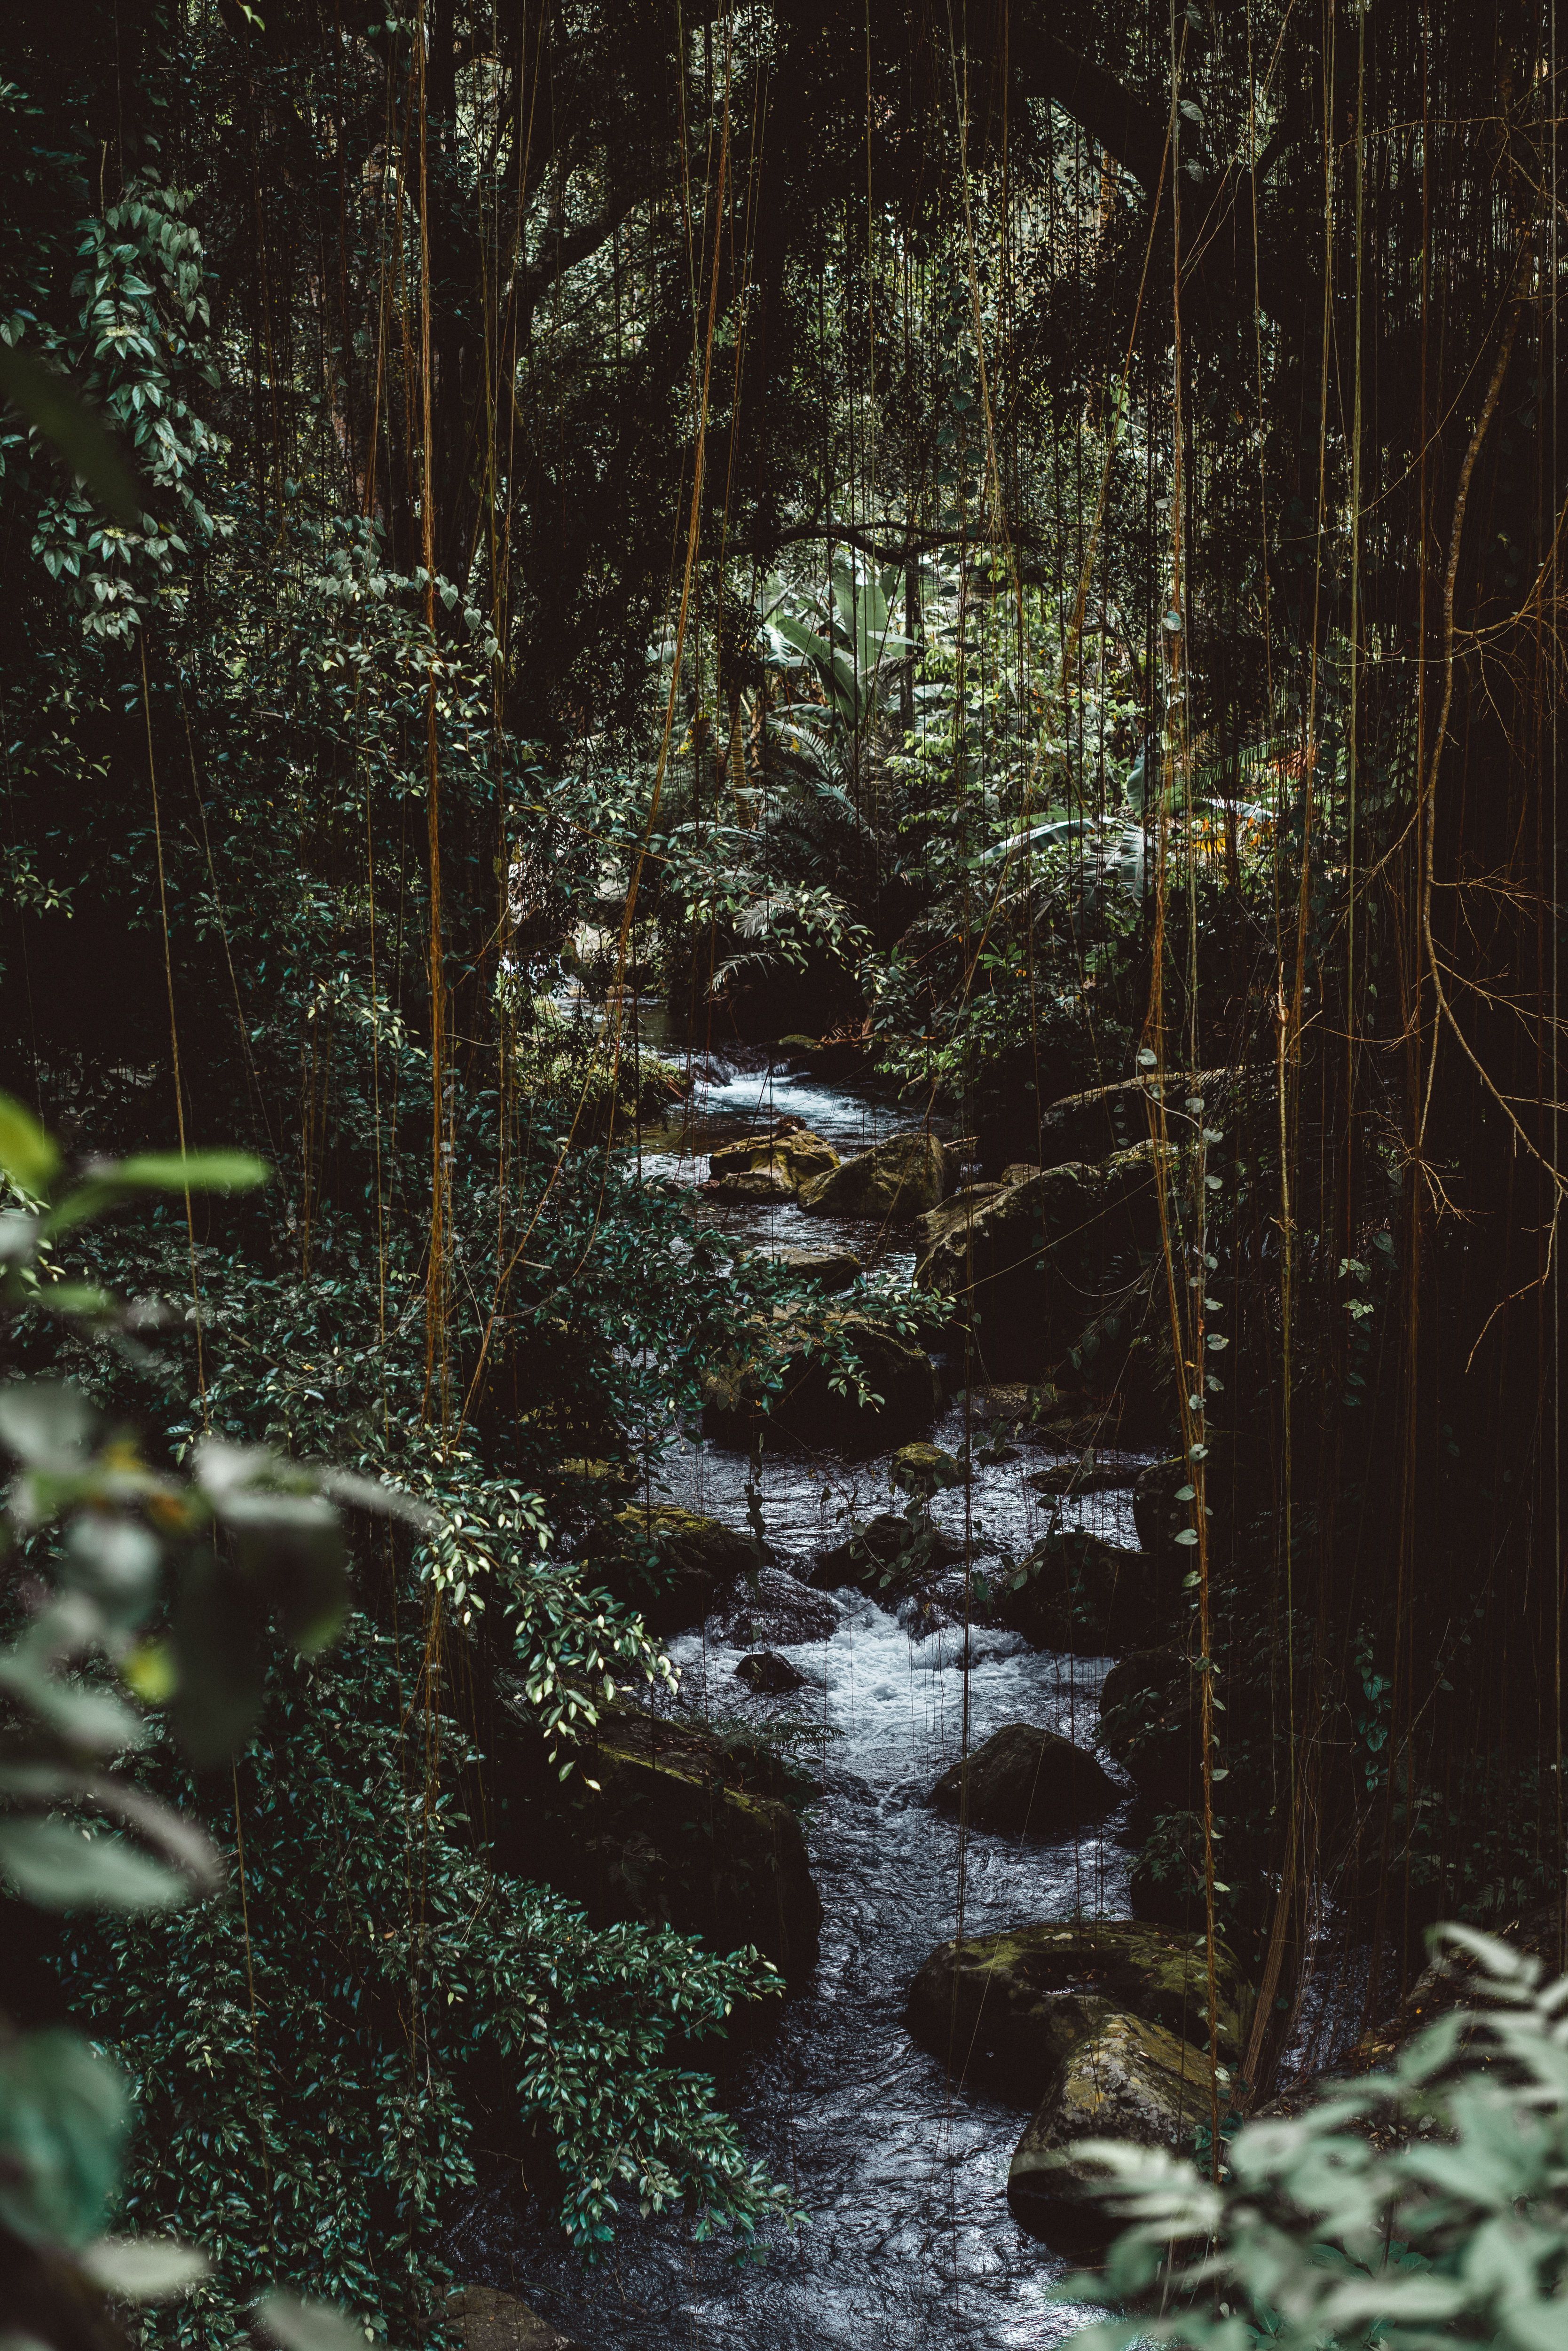 Tranquility Rainforest Meditation. Jungle picture, Nature iphone wallpaper, Welcome to the jungle